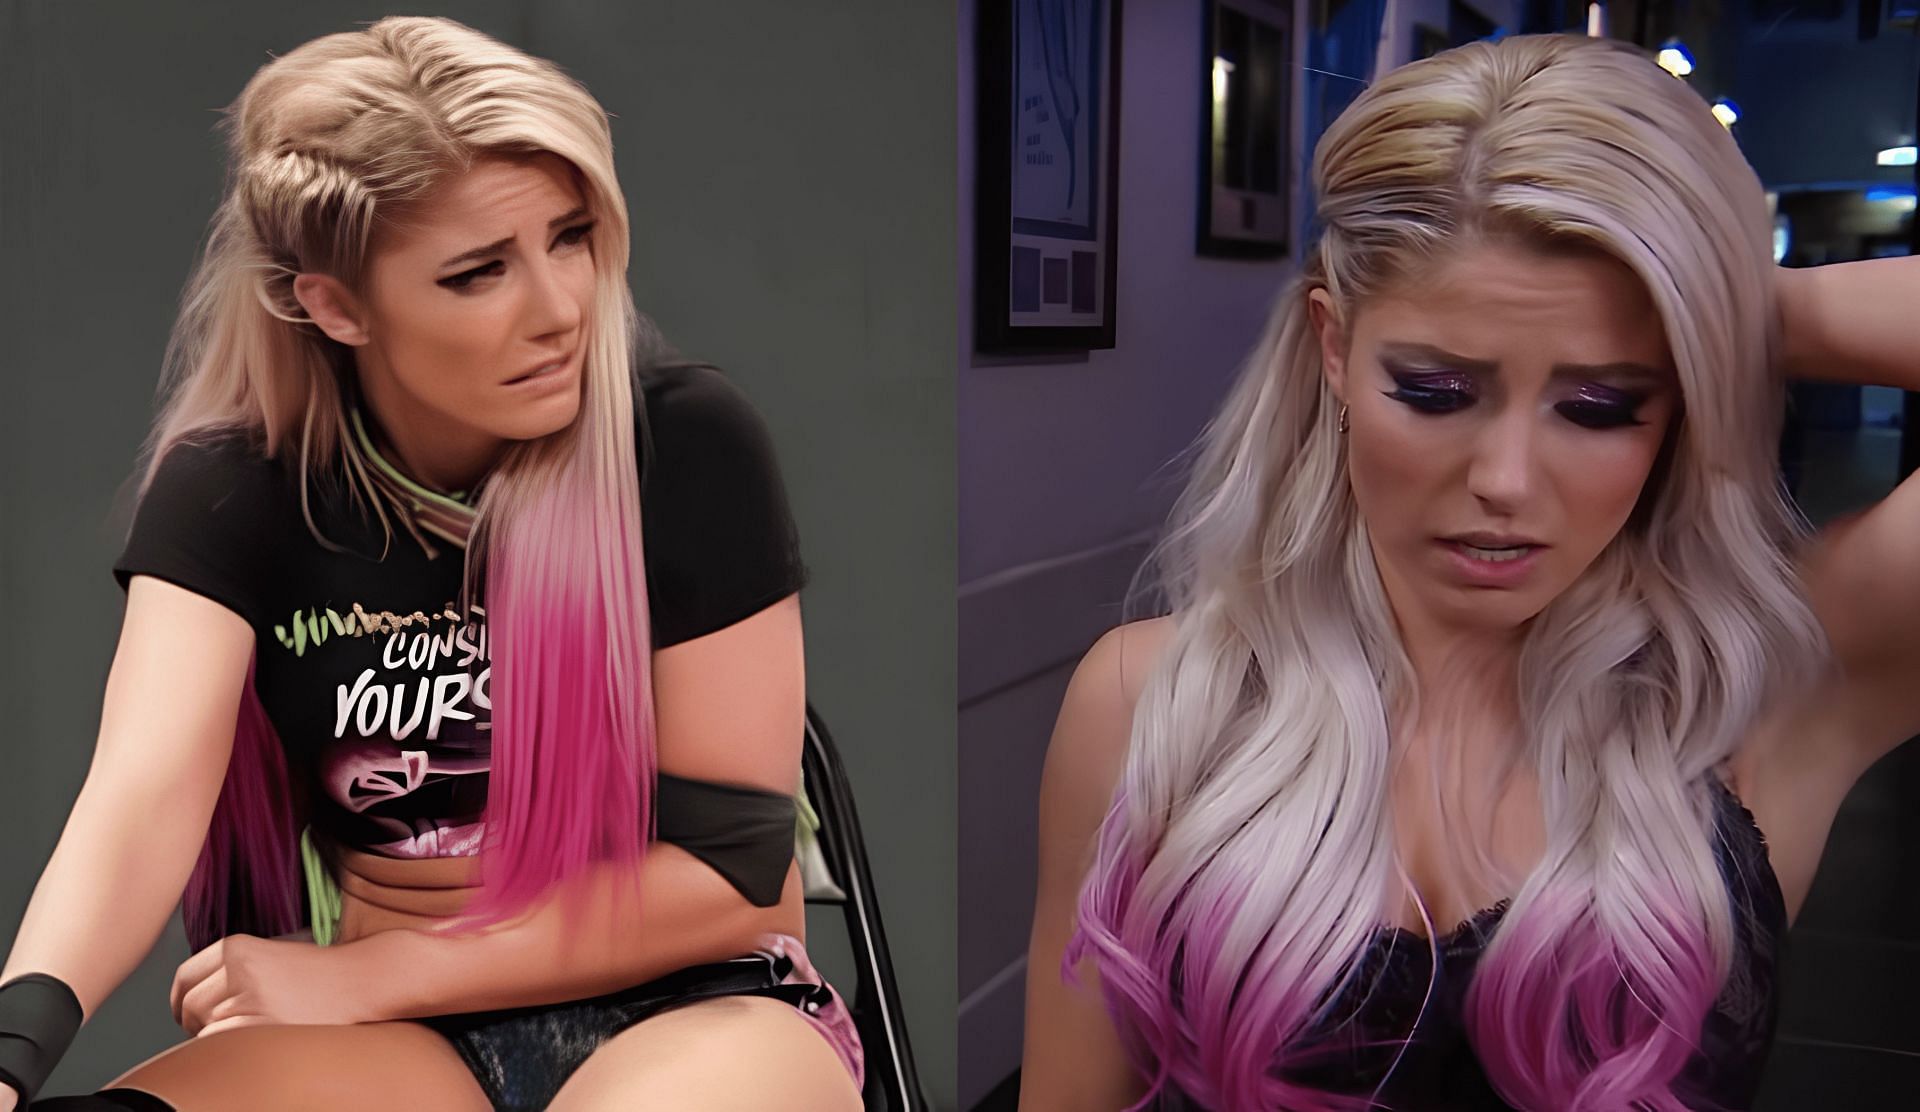 Alexa Bliss is currently on a hiatus from WWE